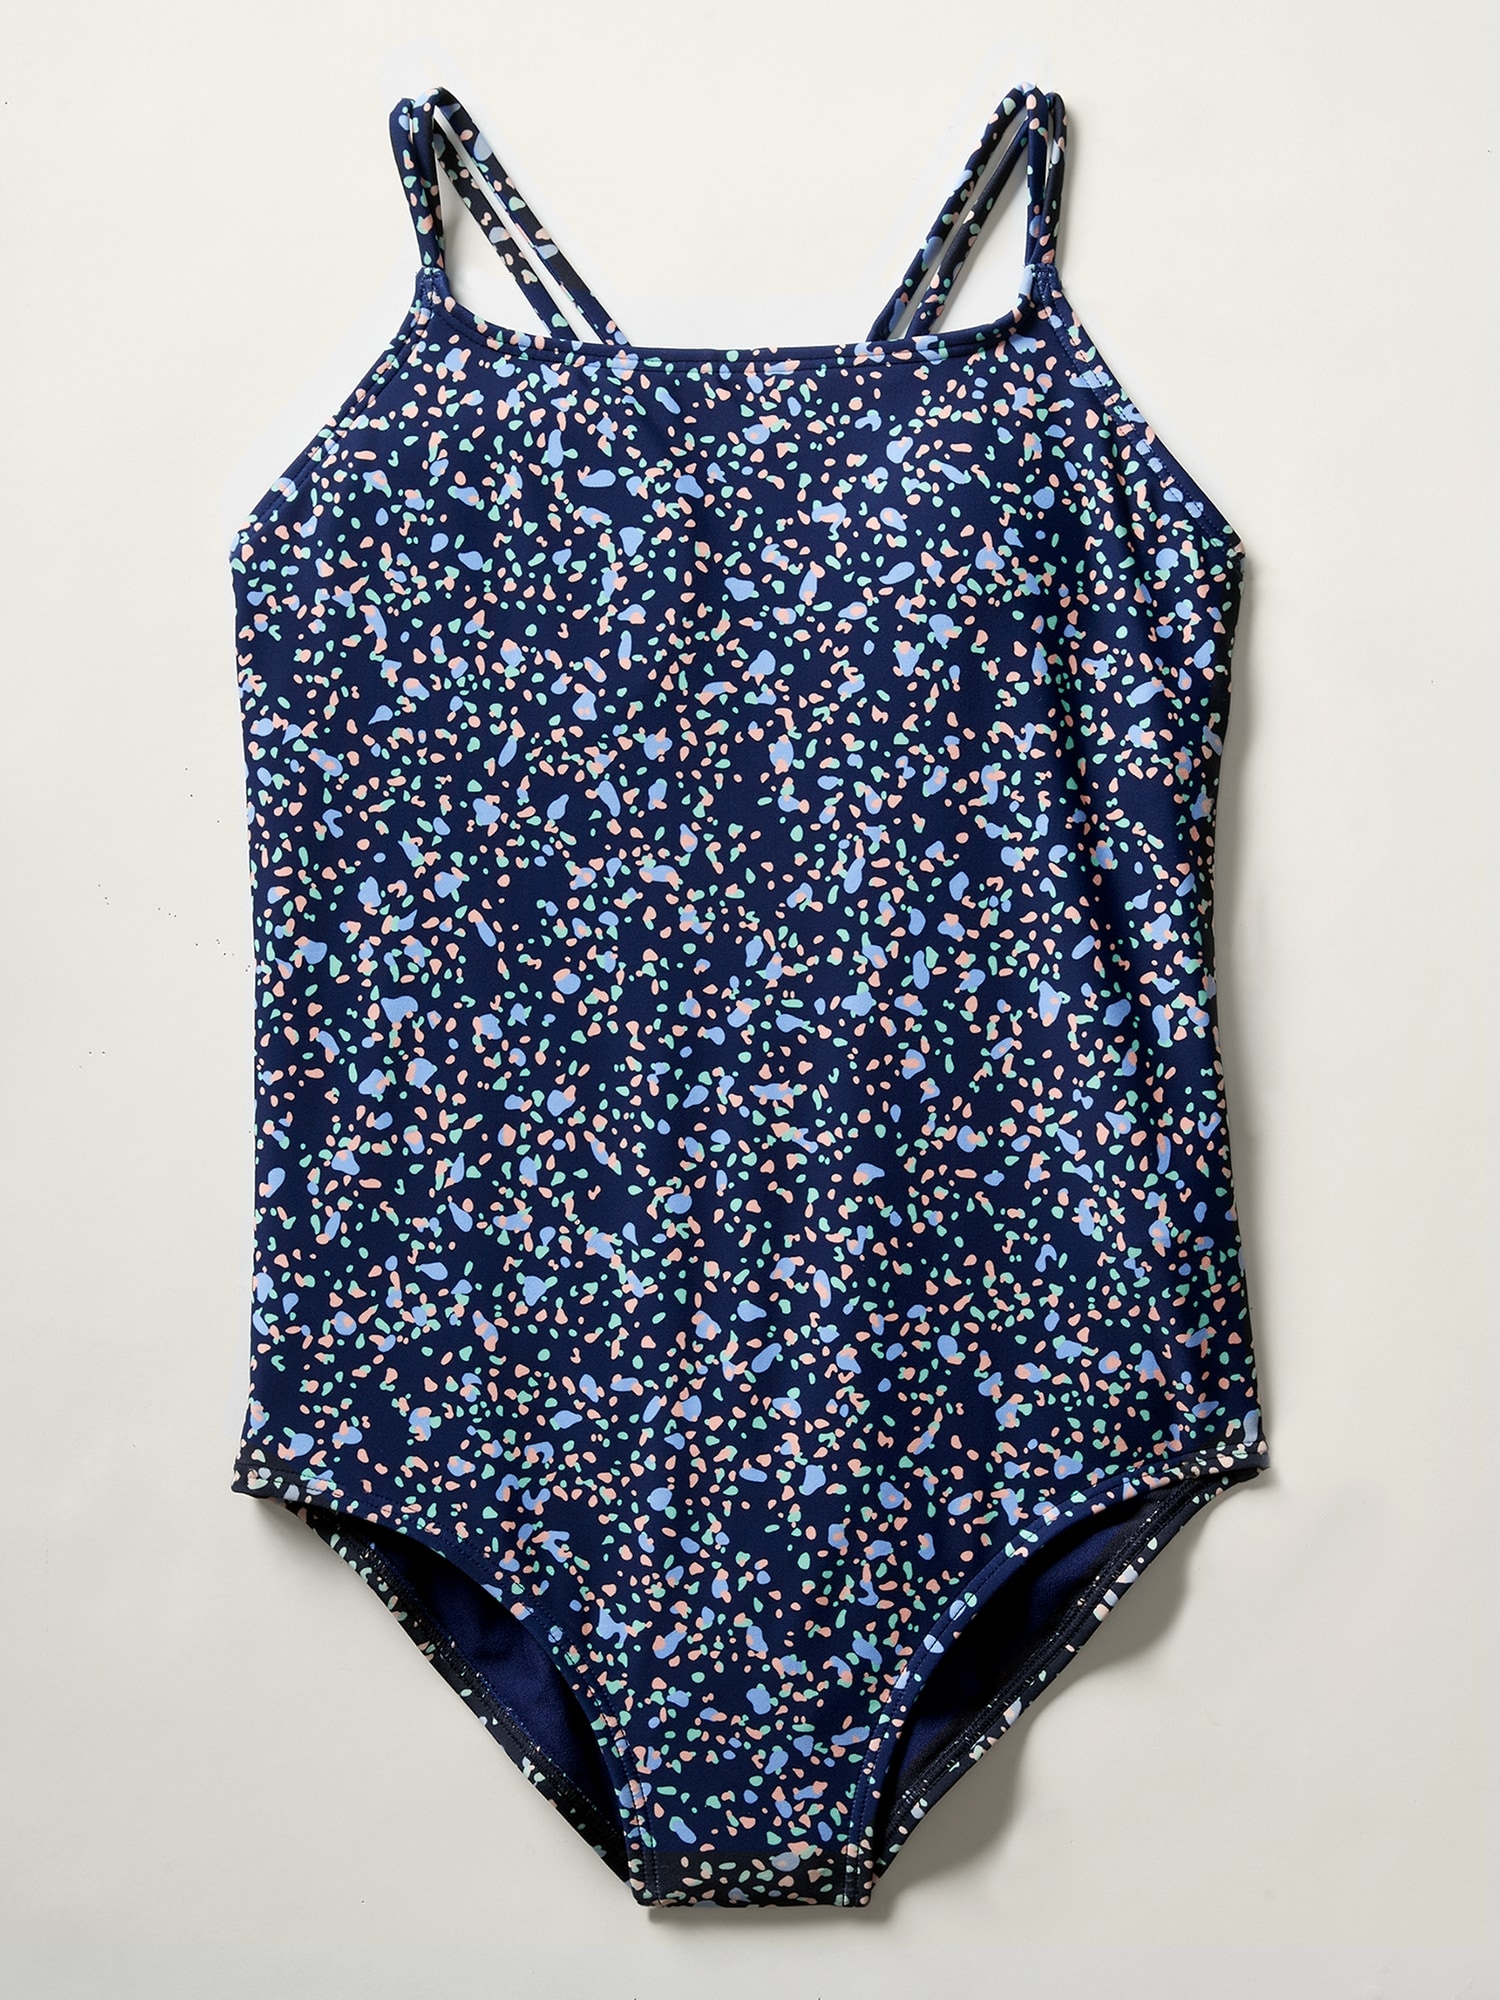 Swimsuits From Athleta Girl to Shop for Spring and Summer